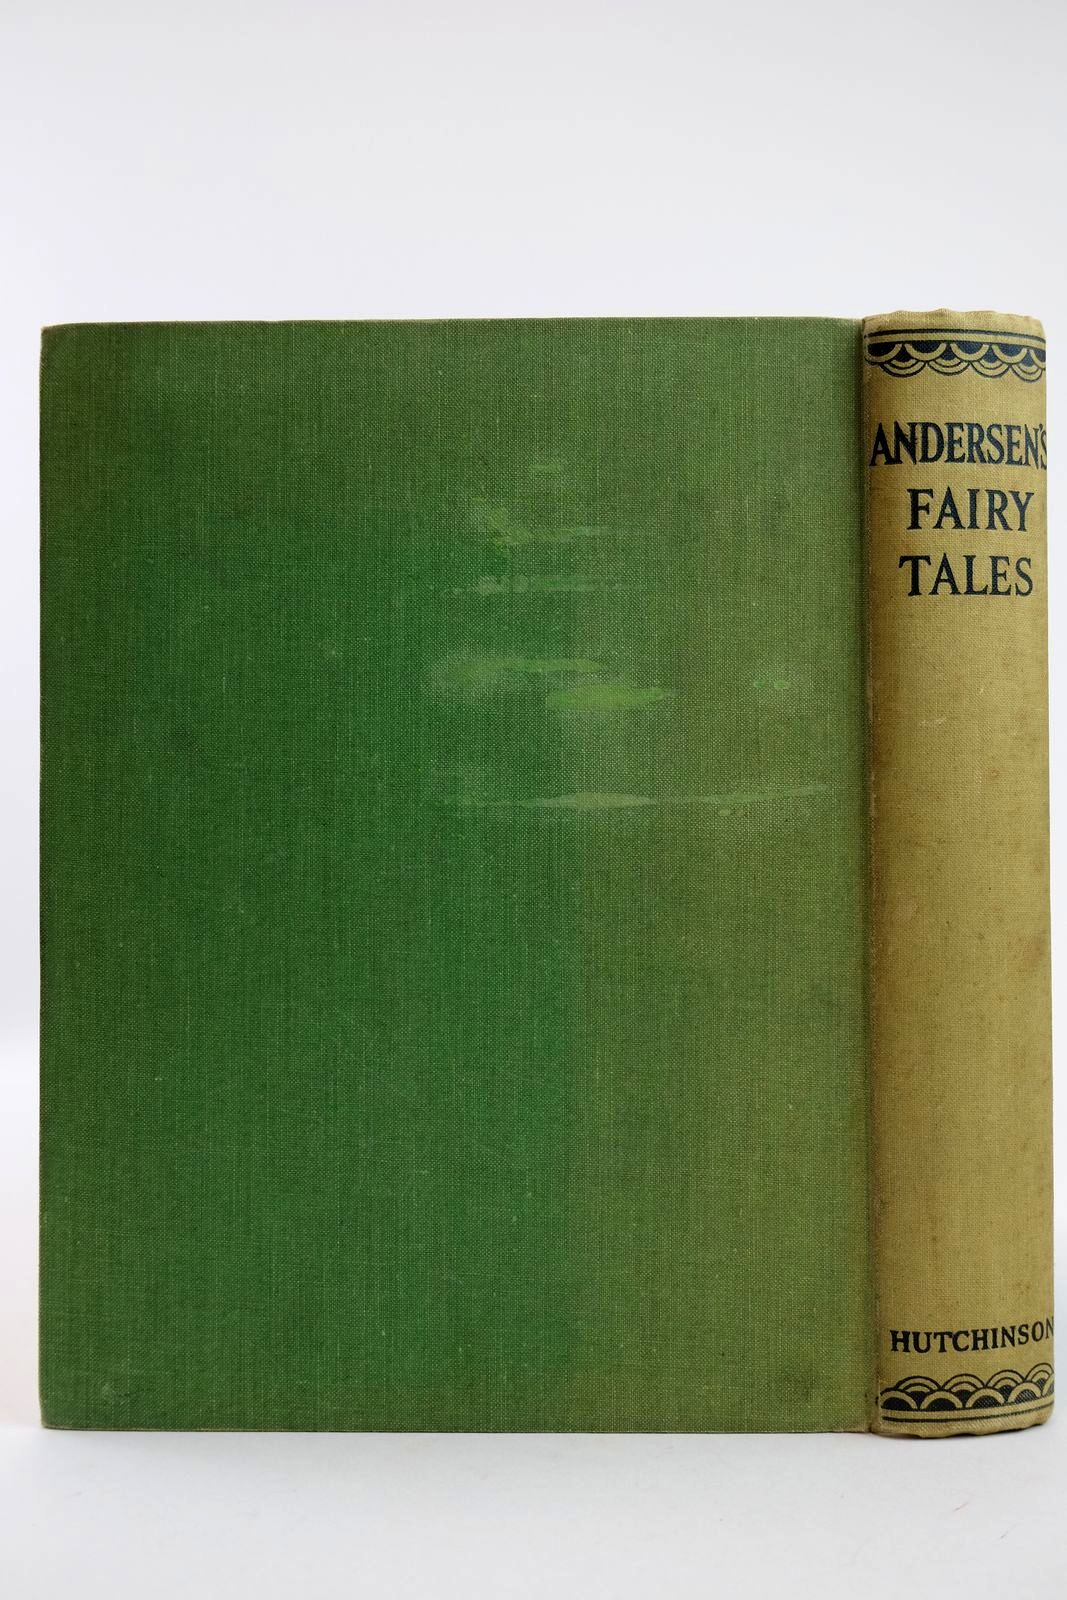 Photo of ANDERSEN'S FAIRY TALES written by Andersen, Hans Christian illustrated by Mercer, Joyce published by Hutchinson & Co. Ltd (STOCK CODE: 2132020)  for sale by Stella & Rose's Books